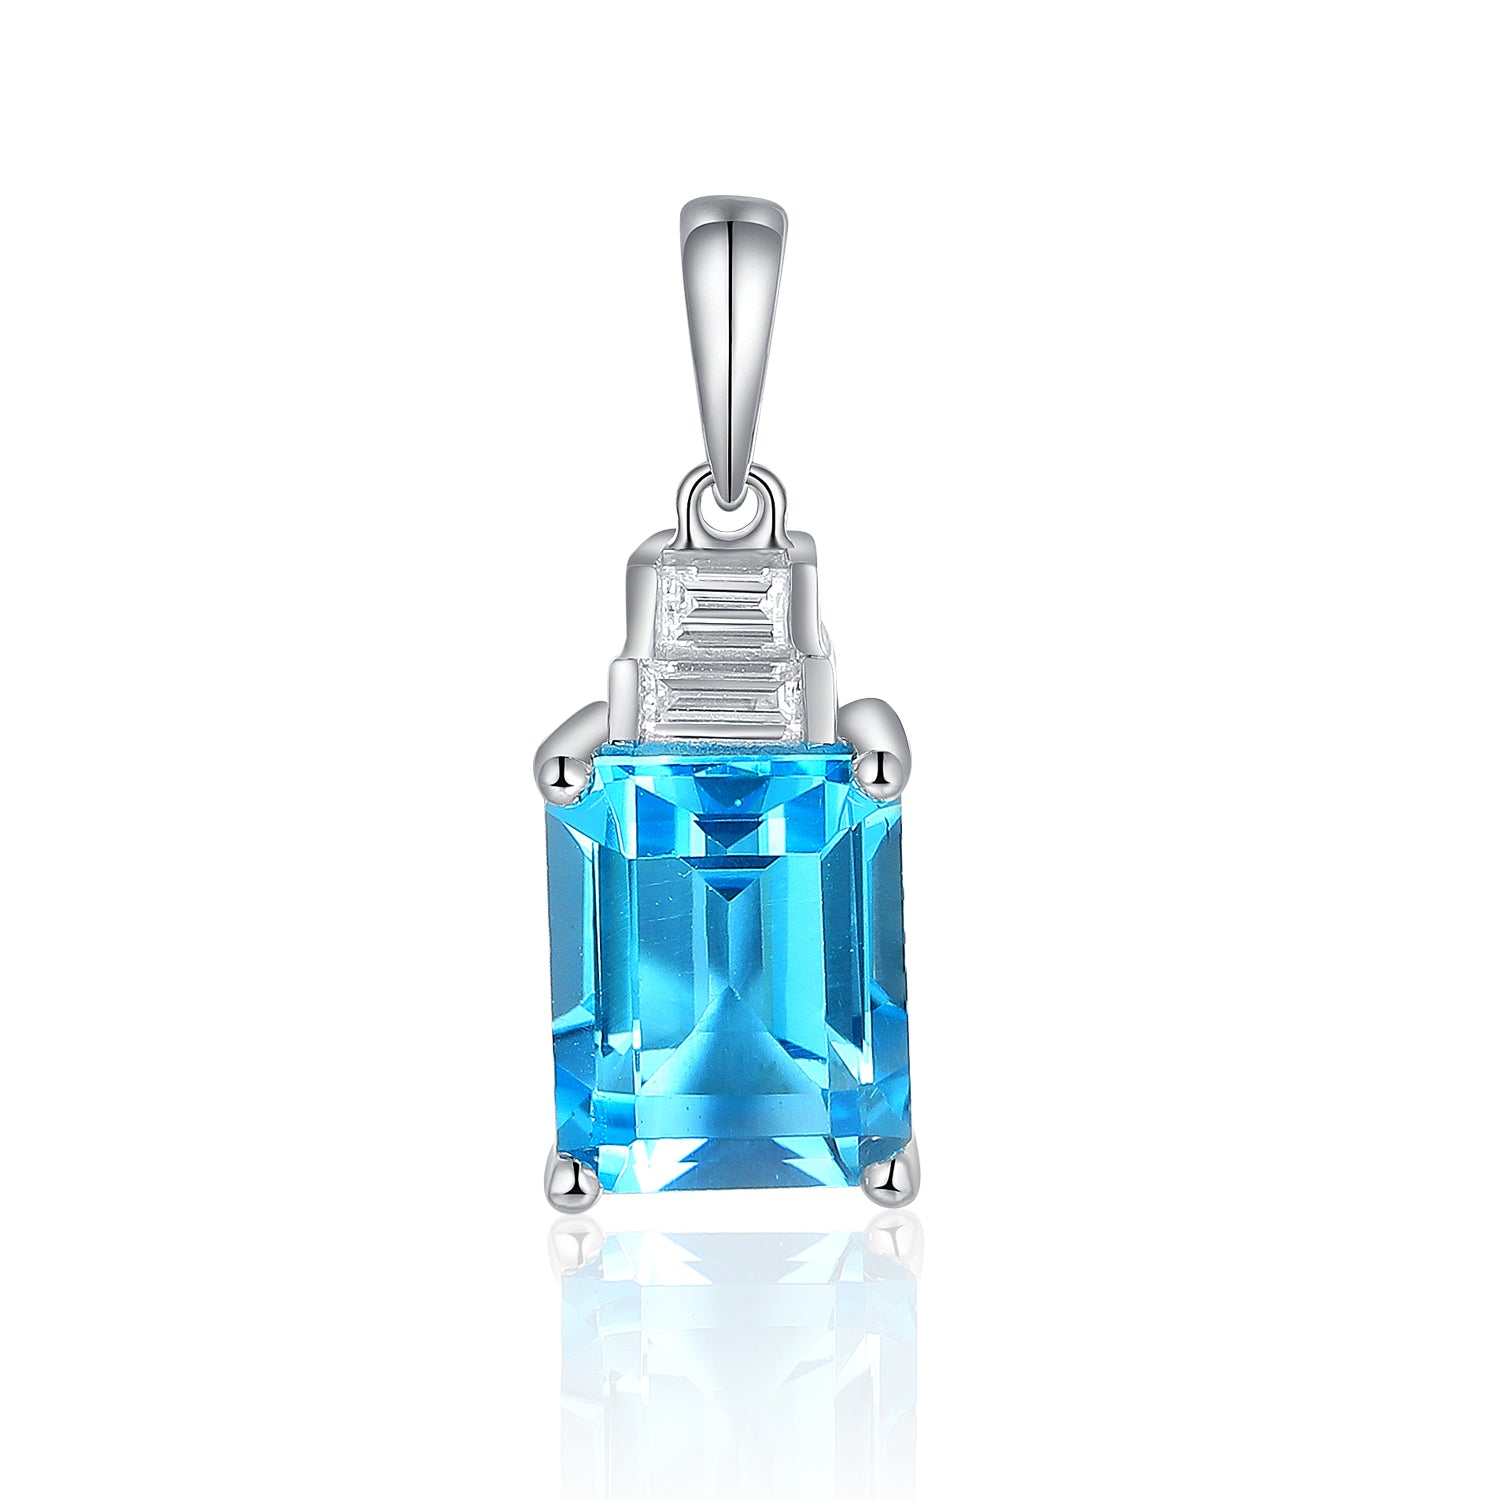 Octagon Gemstone with Double Baguette Top Pendant